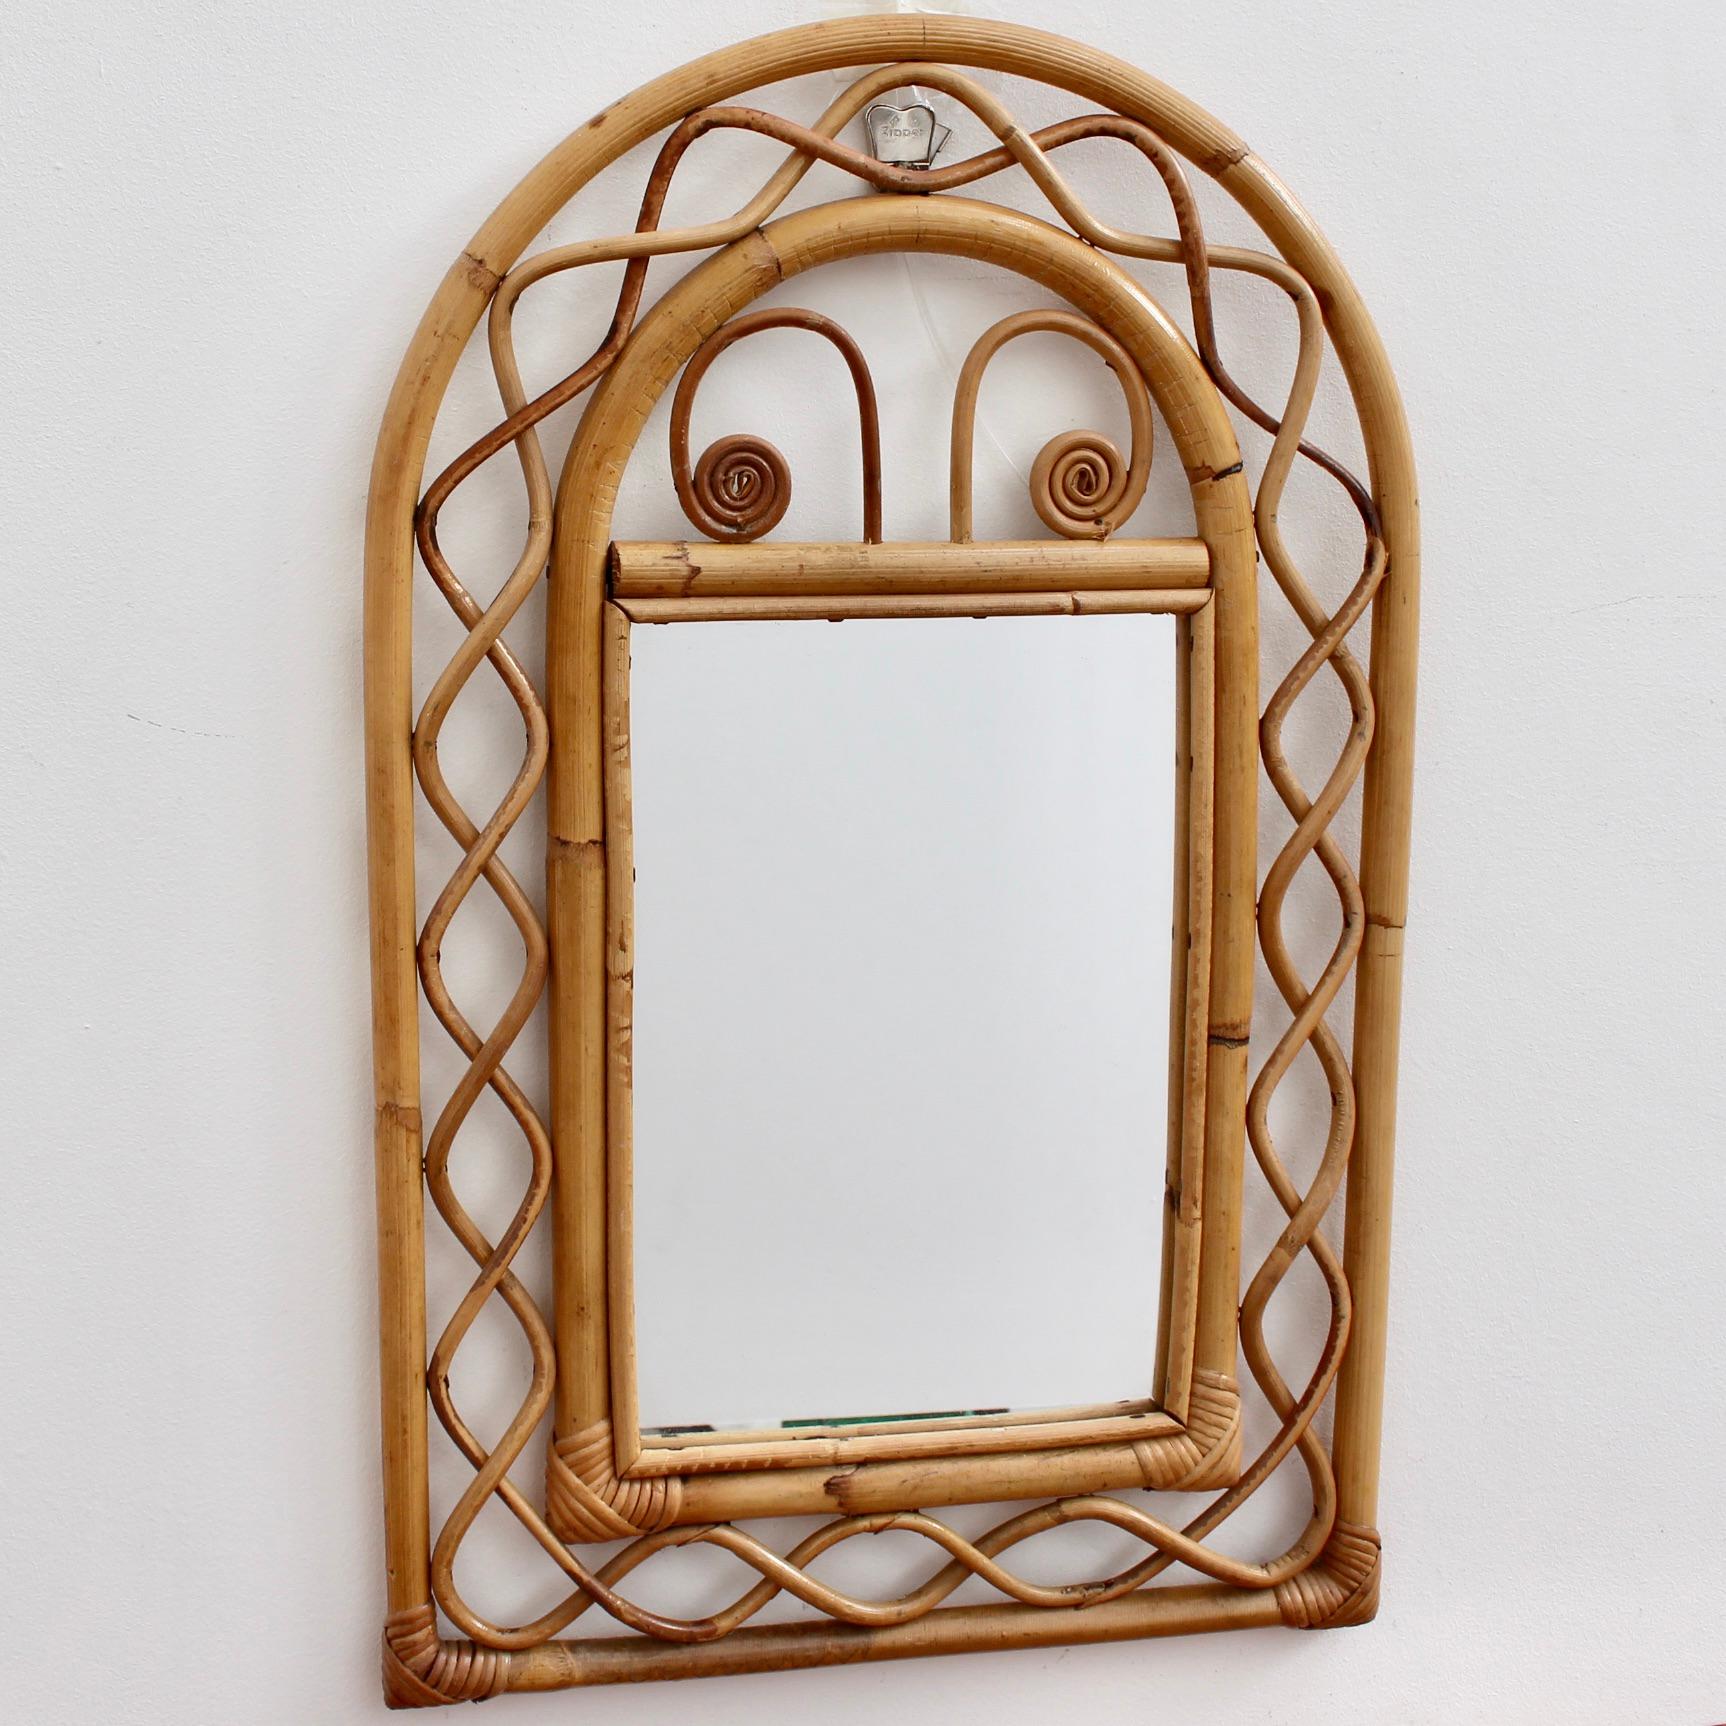 Vintage French rattan wall mirror, (circa 1960s). This is a Byzantine-inspired design with inner and outer frames connected by parabolic shapes of rattan cane. The right-angled corners are lashed together and protected with rattan strands.